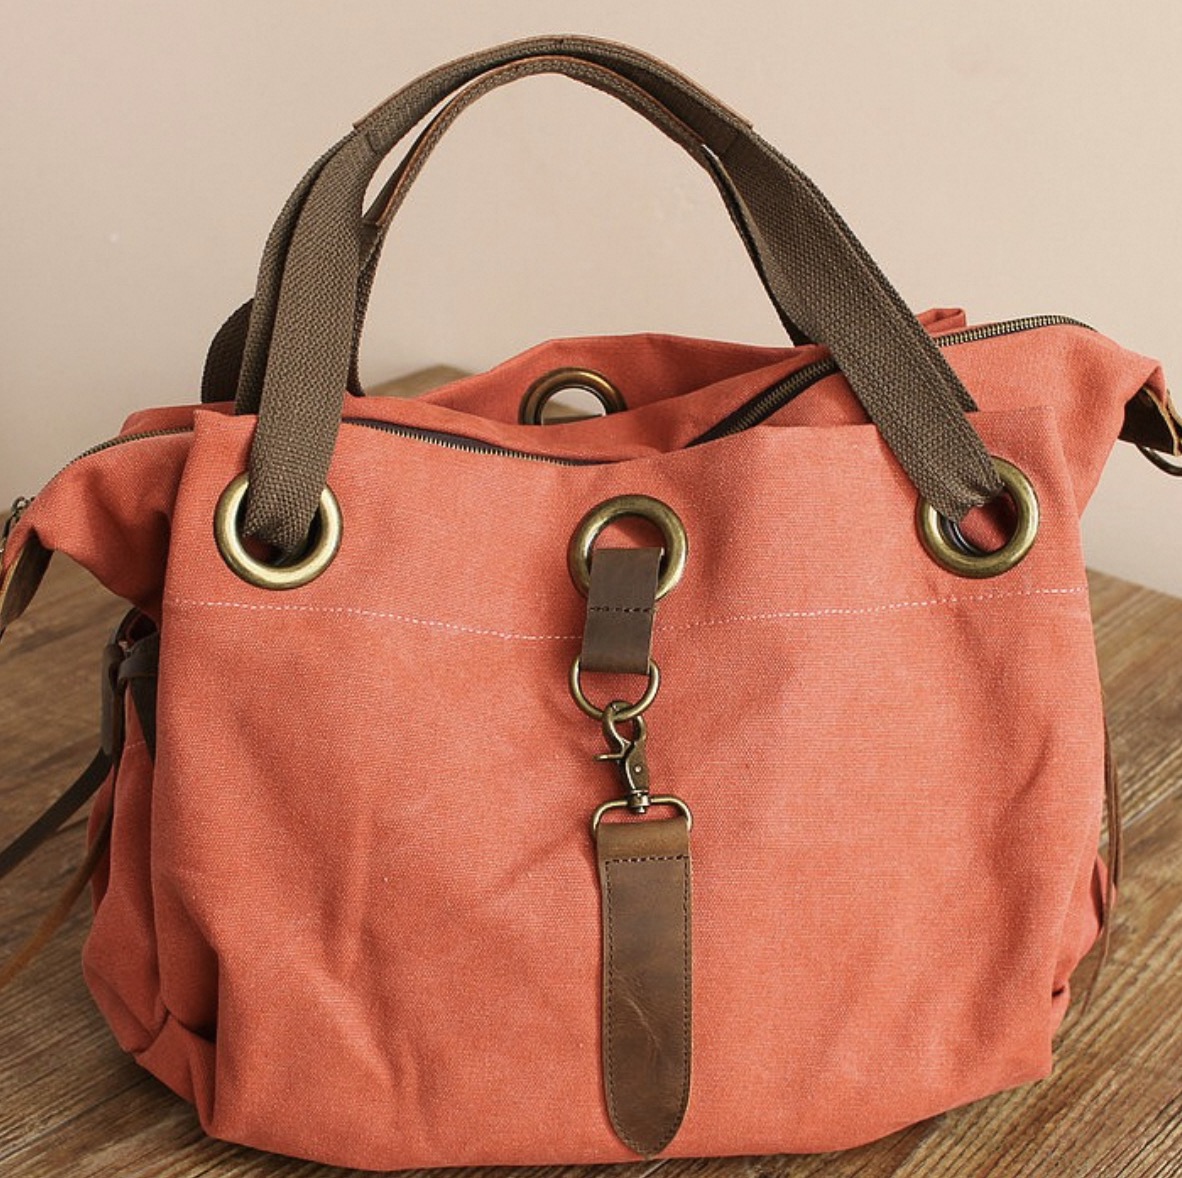 Messenger Bags for School Women: Chic and Functional Picks插图3